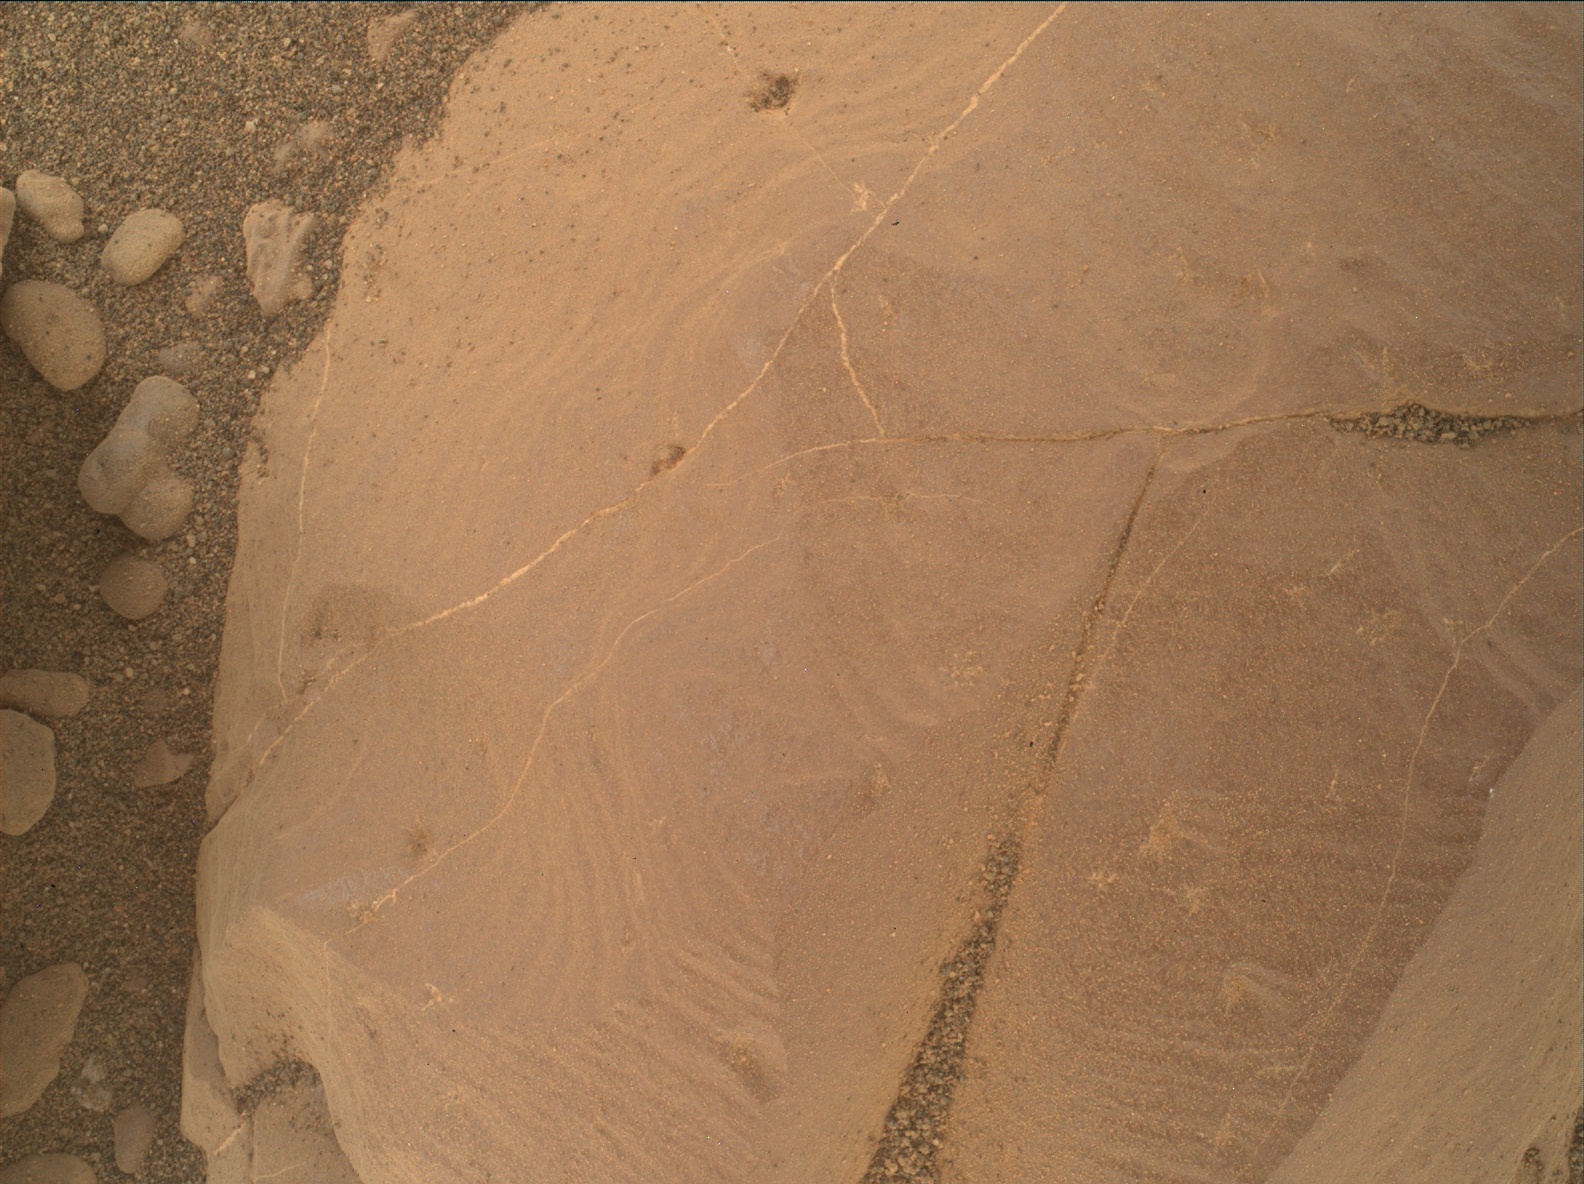 Nasa's Mars rover Curiosity acquired this image using its Mars Hand Lens Imager (MAHLI) on Sol 1955